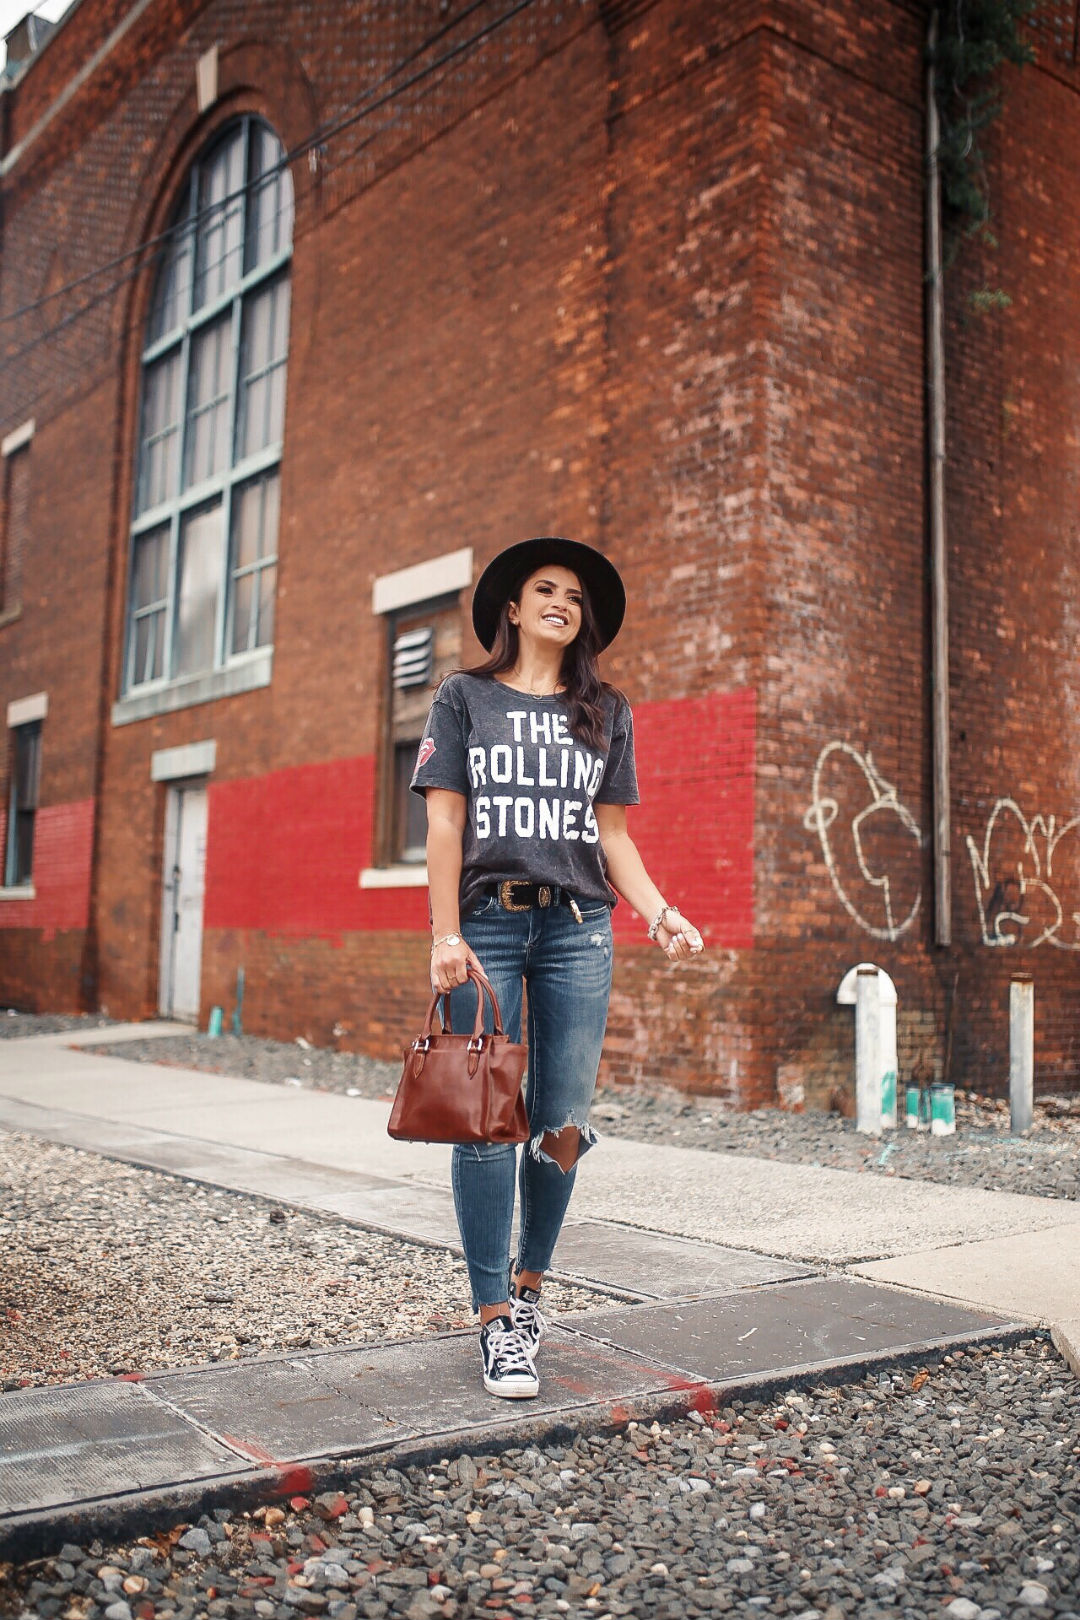 Blogger Sarah Lindner of The House of Sequins wearing AE X STONES SLEEVE PATCH GRAPHIC TEE and distressed jeans